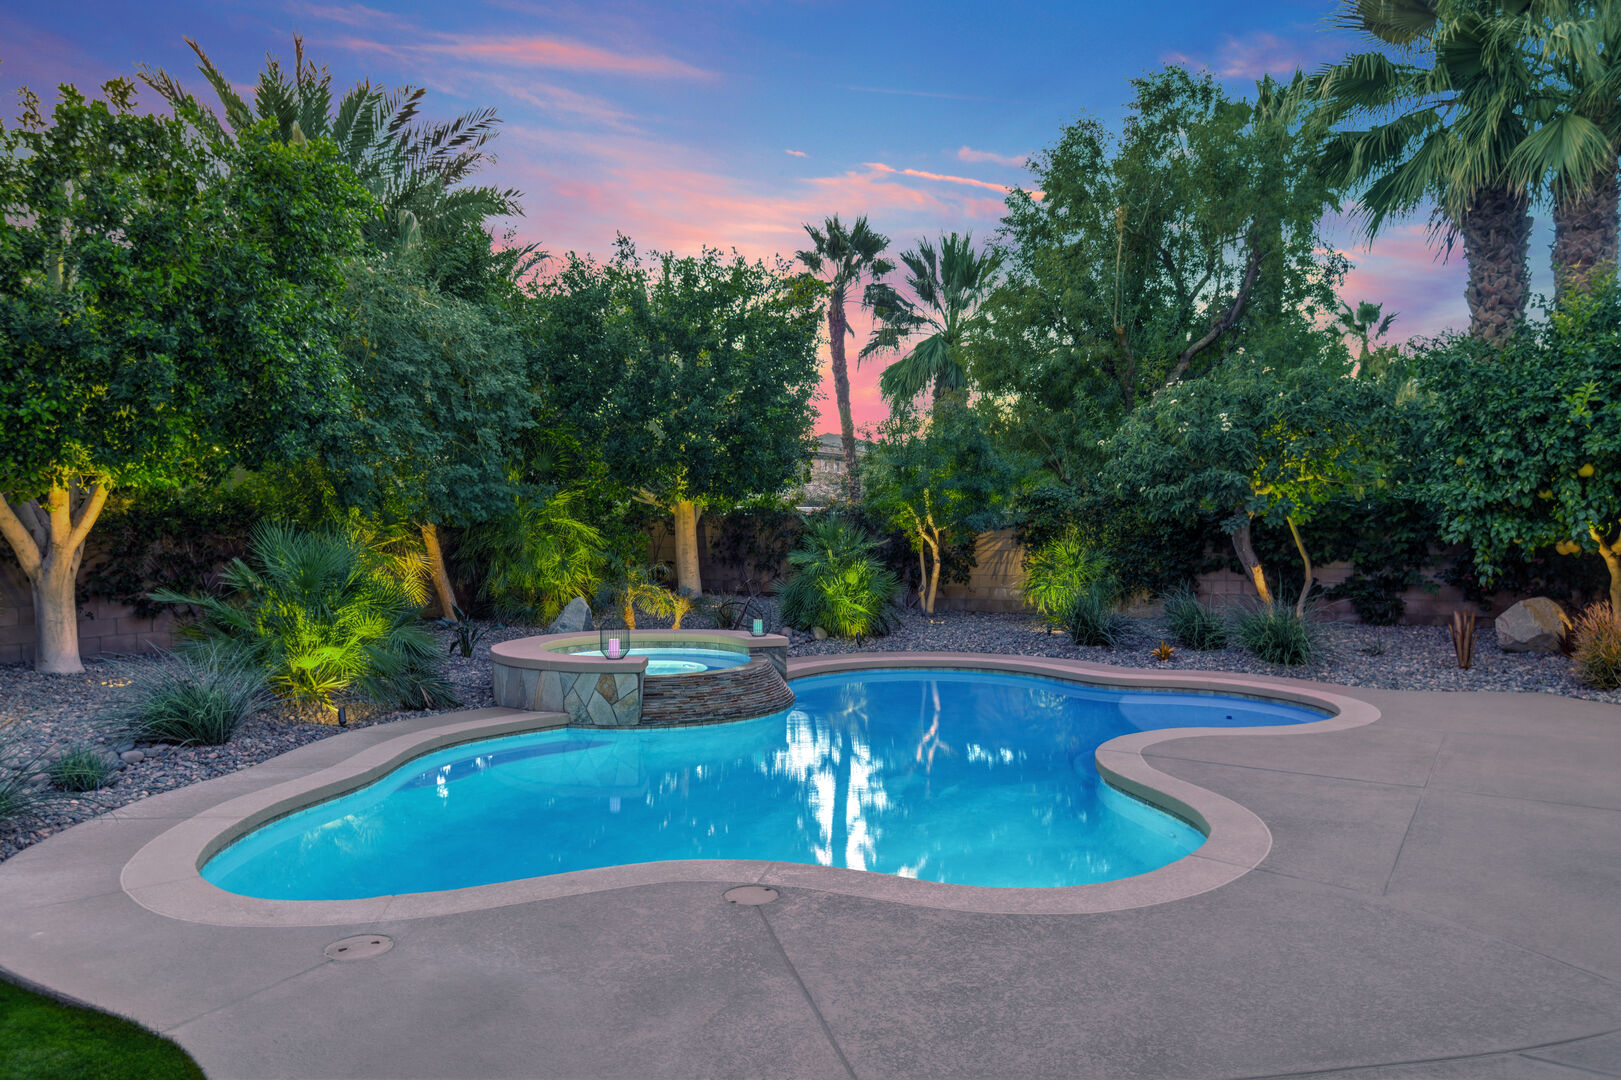 Your private oasis awaits by the poolside.